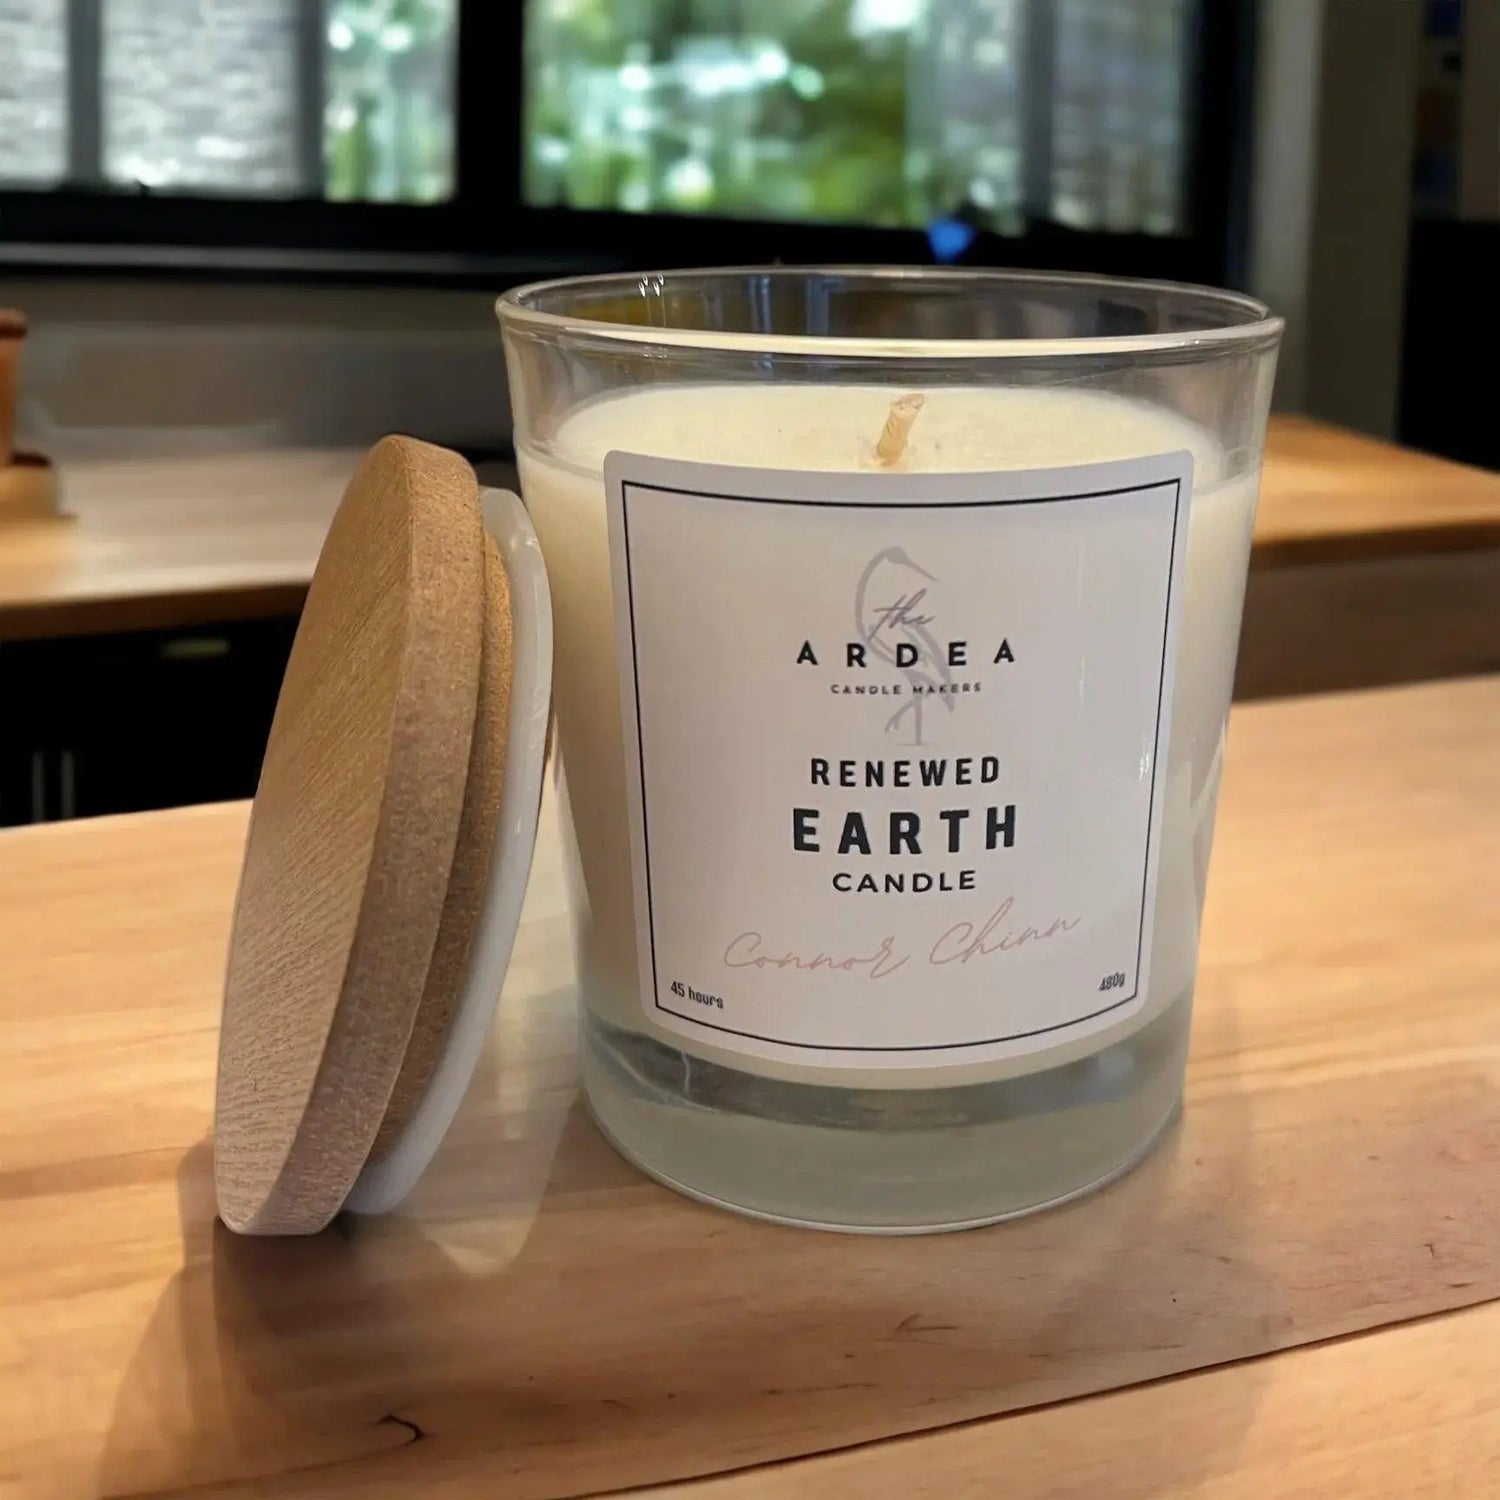 Renewed Earth Candle - 600g - The Ardea Candle Makers